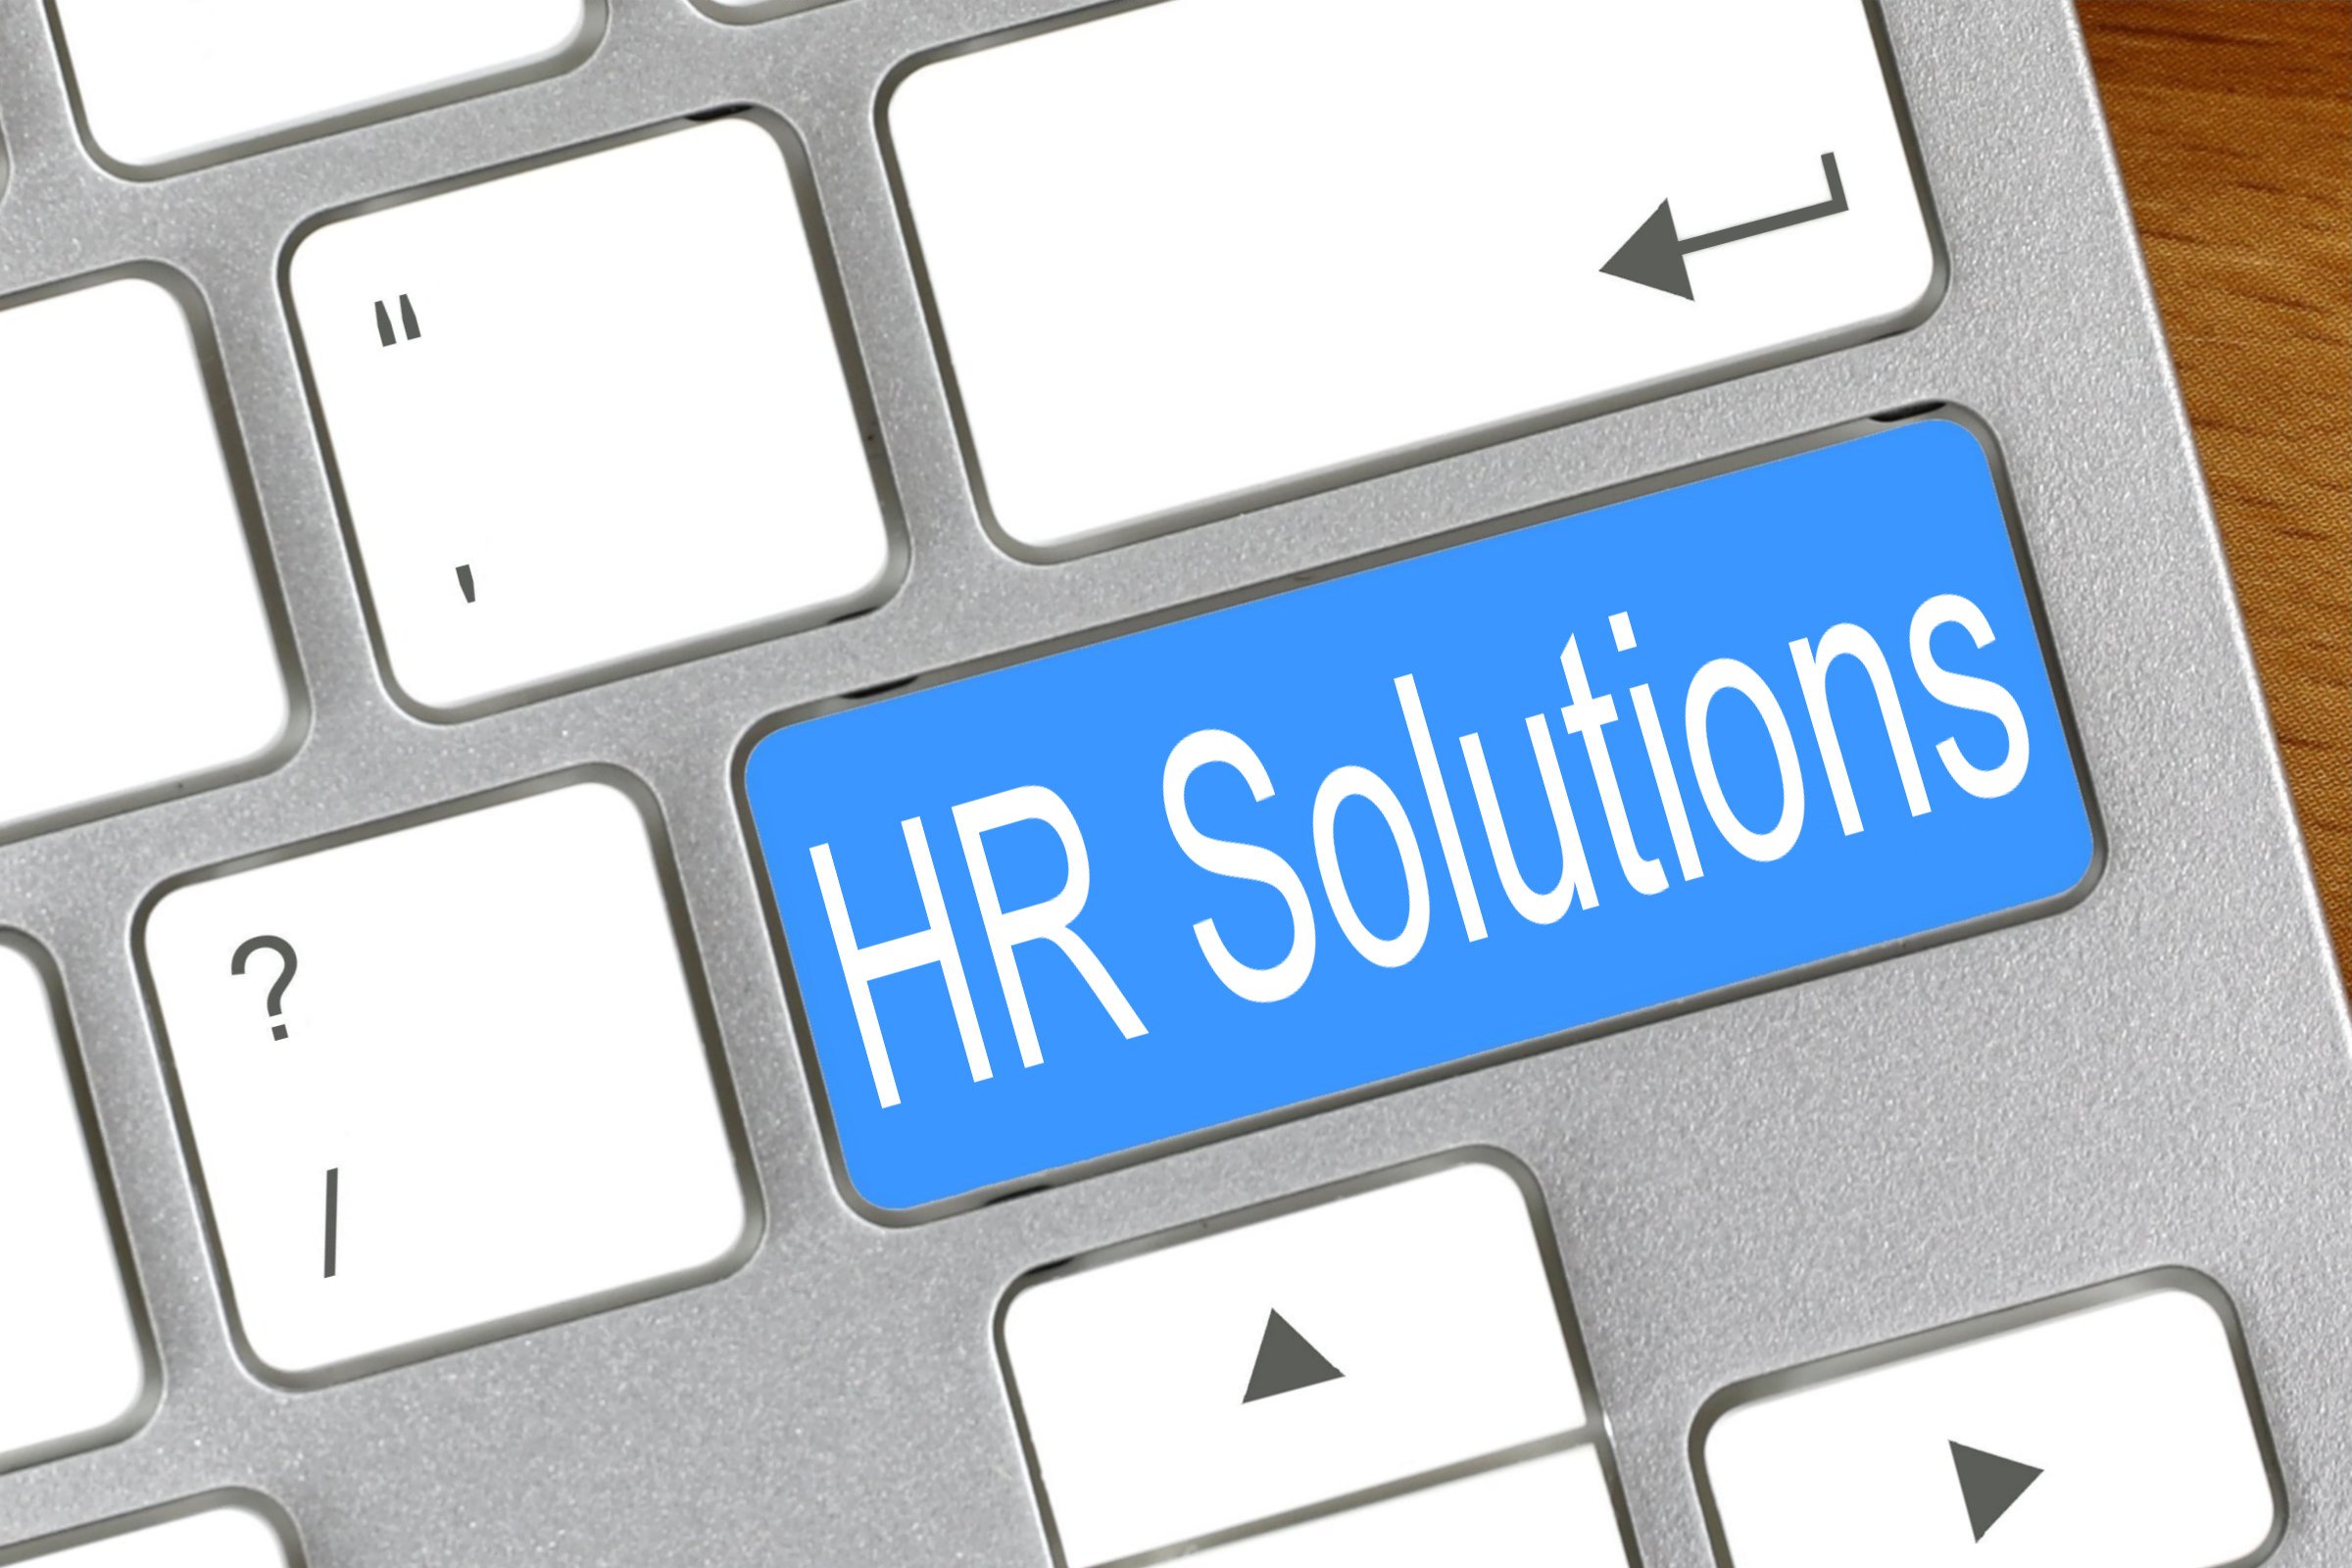 hr solutions Image - Keyboard 2